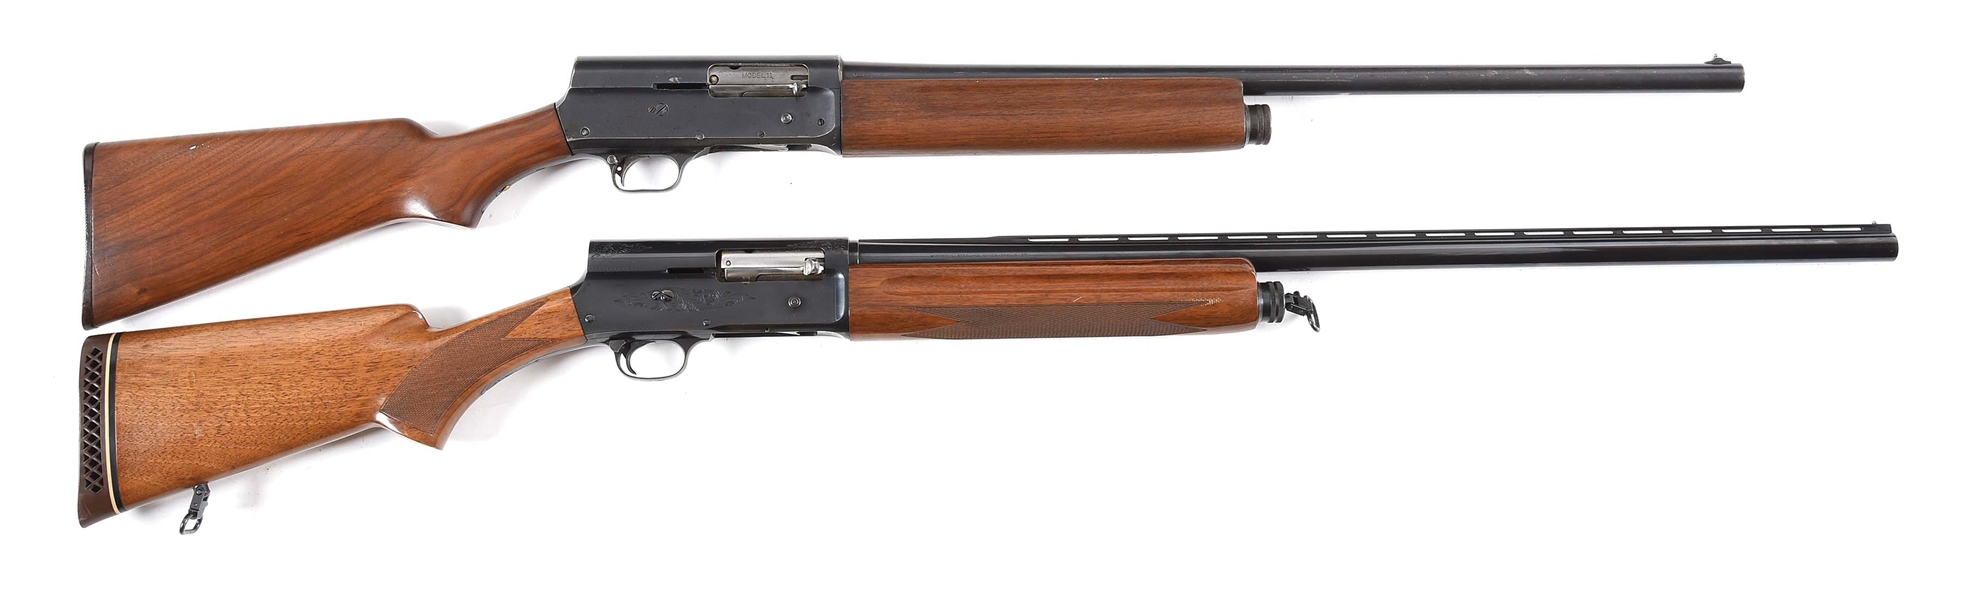 (C) LOT OF 2: SCARCE REMINGTON 11 WITH U.S. MILITARY MARKINGS AND BROWNING A5 SEMI AUTOMATIC SHOTGUNS.